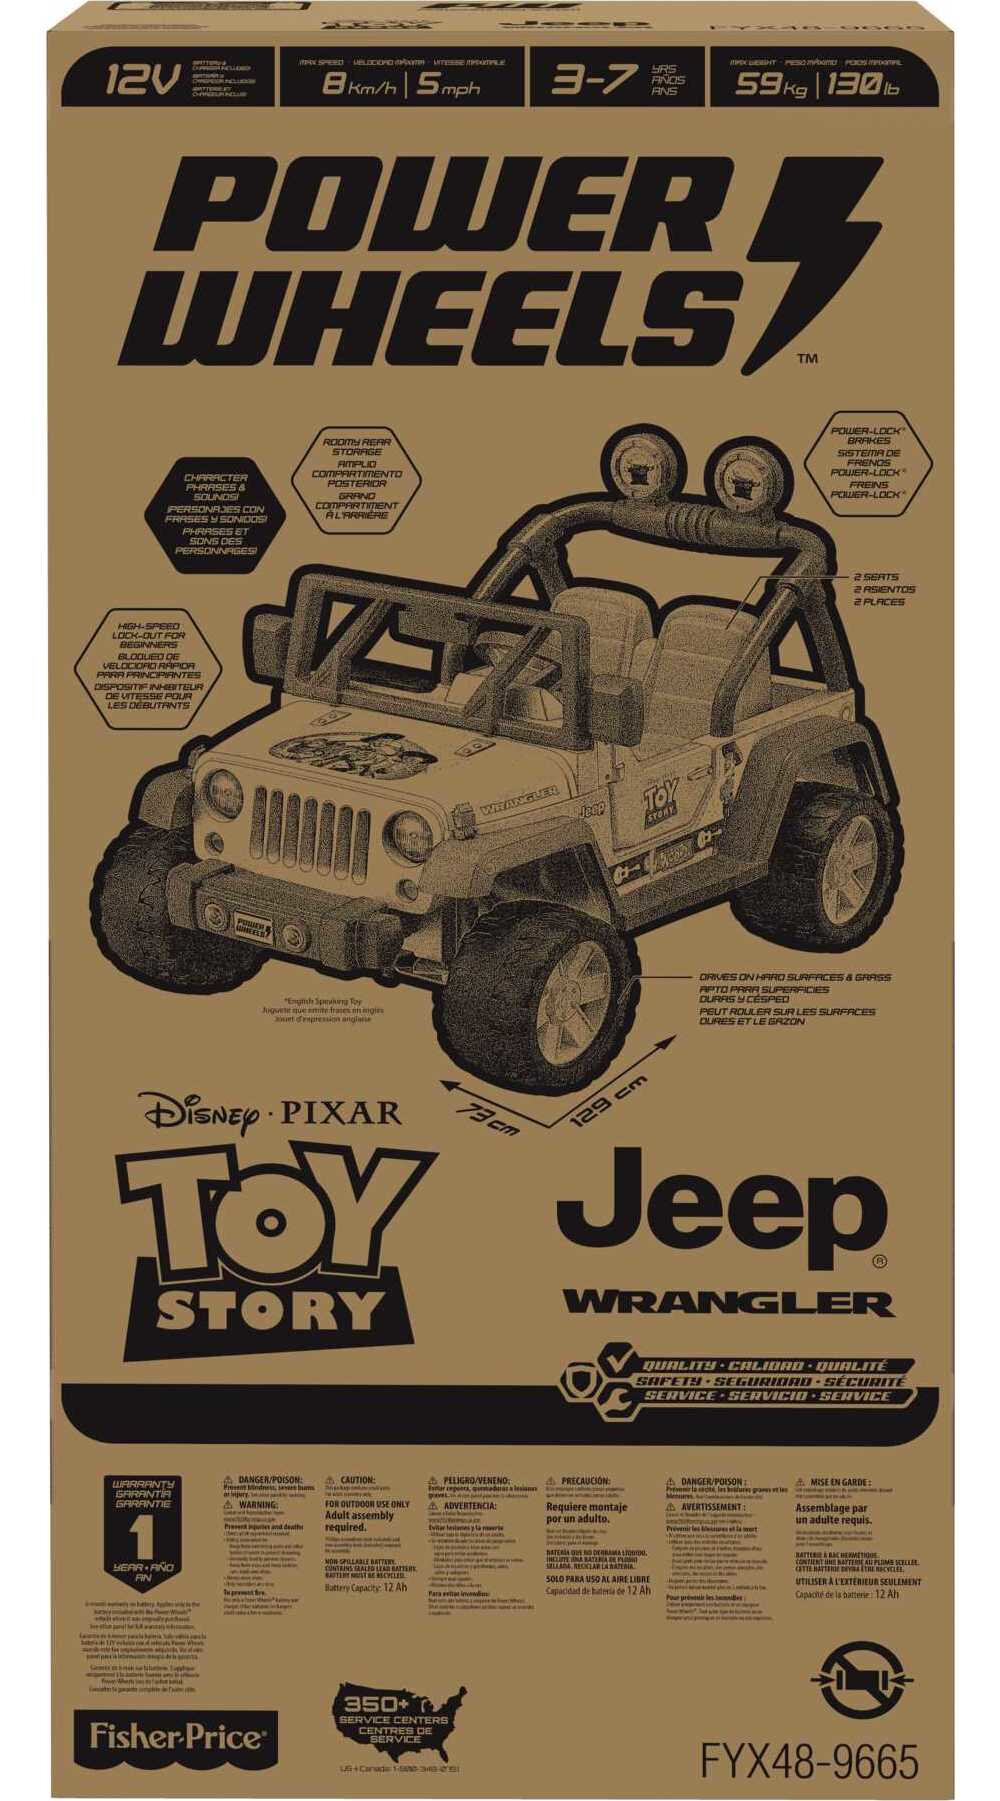 Power Wheels Disney Pixar Toy Story Jeep Wrangler Battery Powered Ride-On Vehicle with Sounds, 12V - image 3 of 8